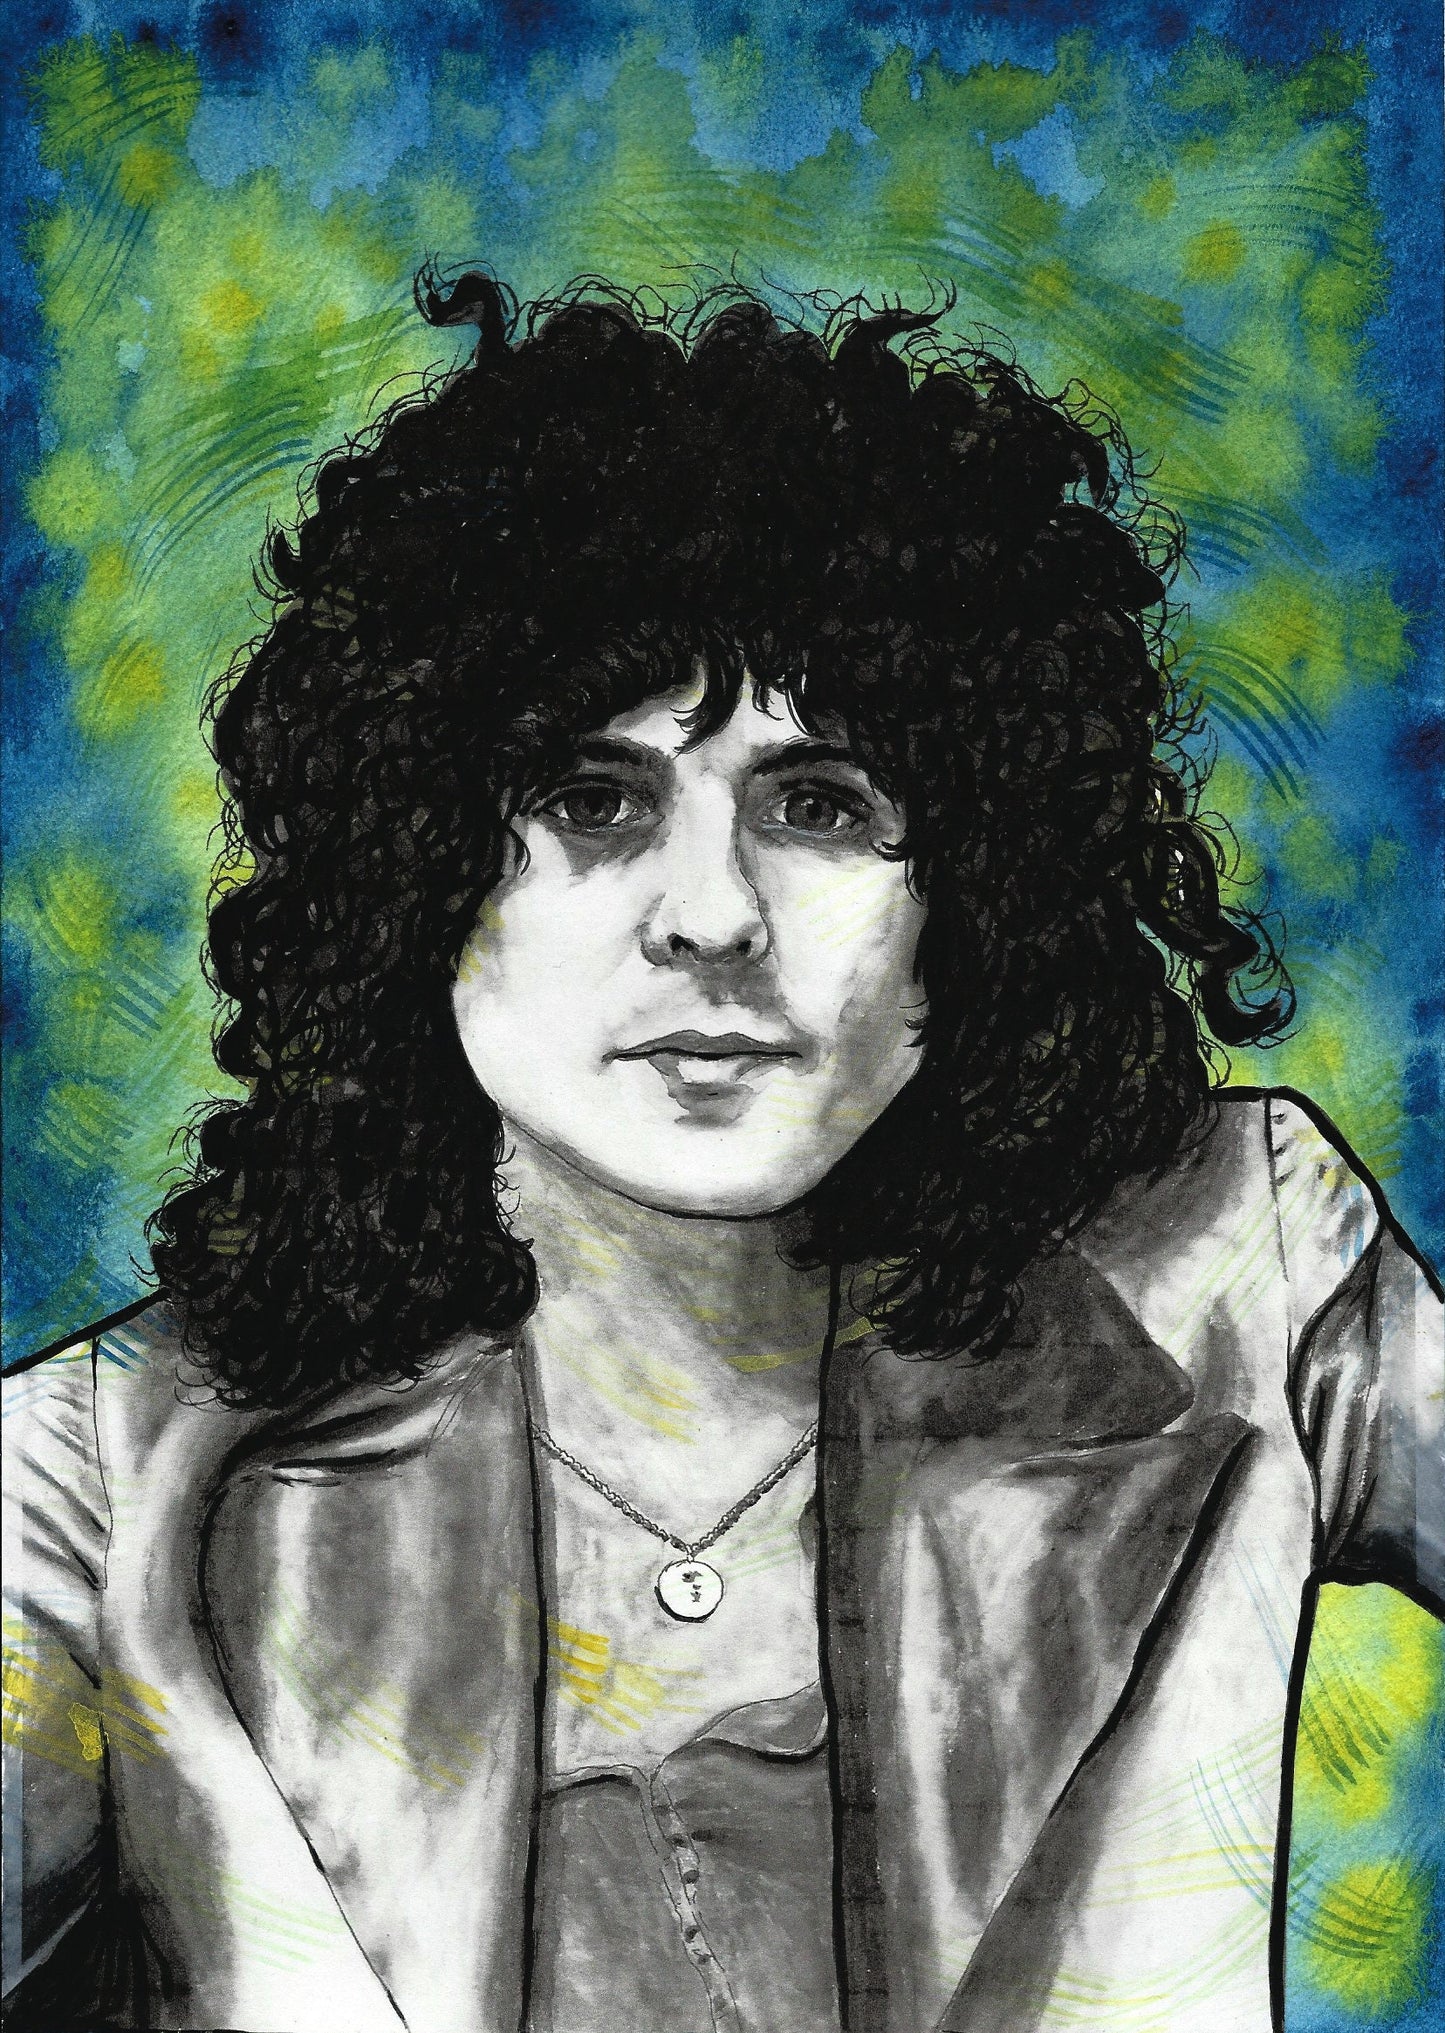 Marc Bolan of T. Rex watercolour and ink painting unframed, glam rock wall art, music fan gift, original watercolour, celebrity portrait